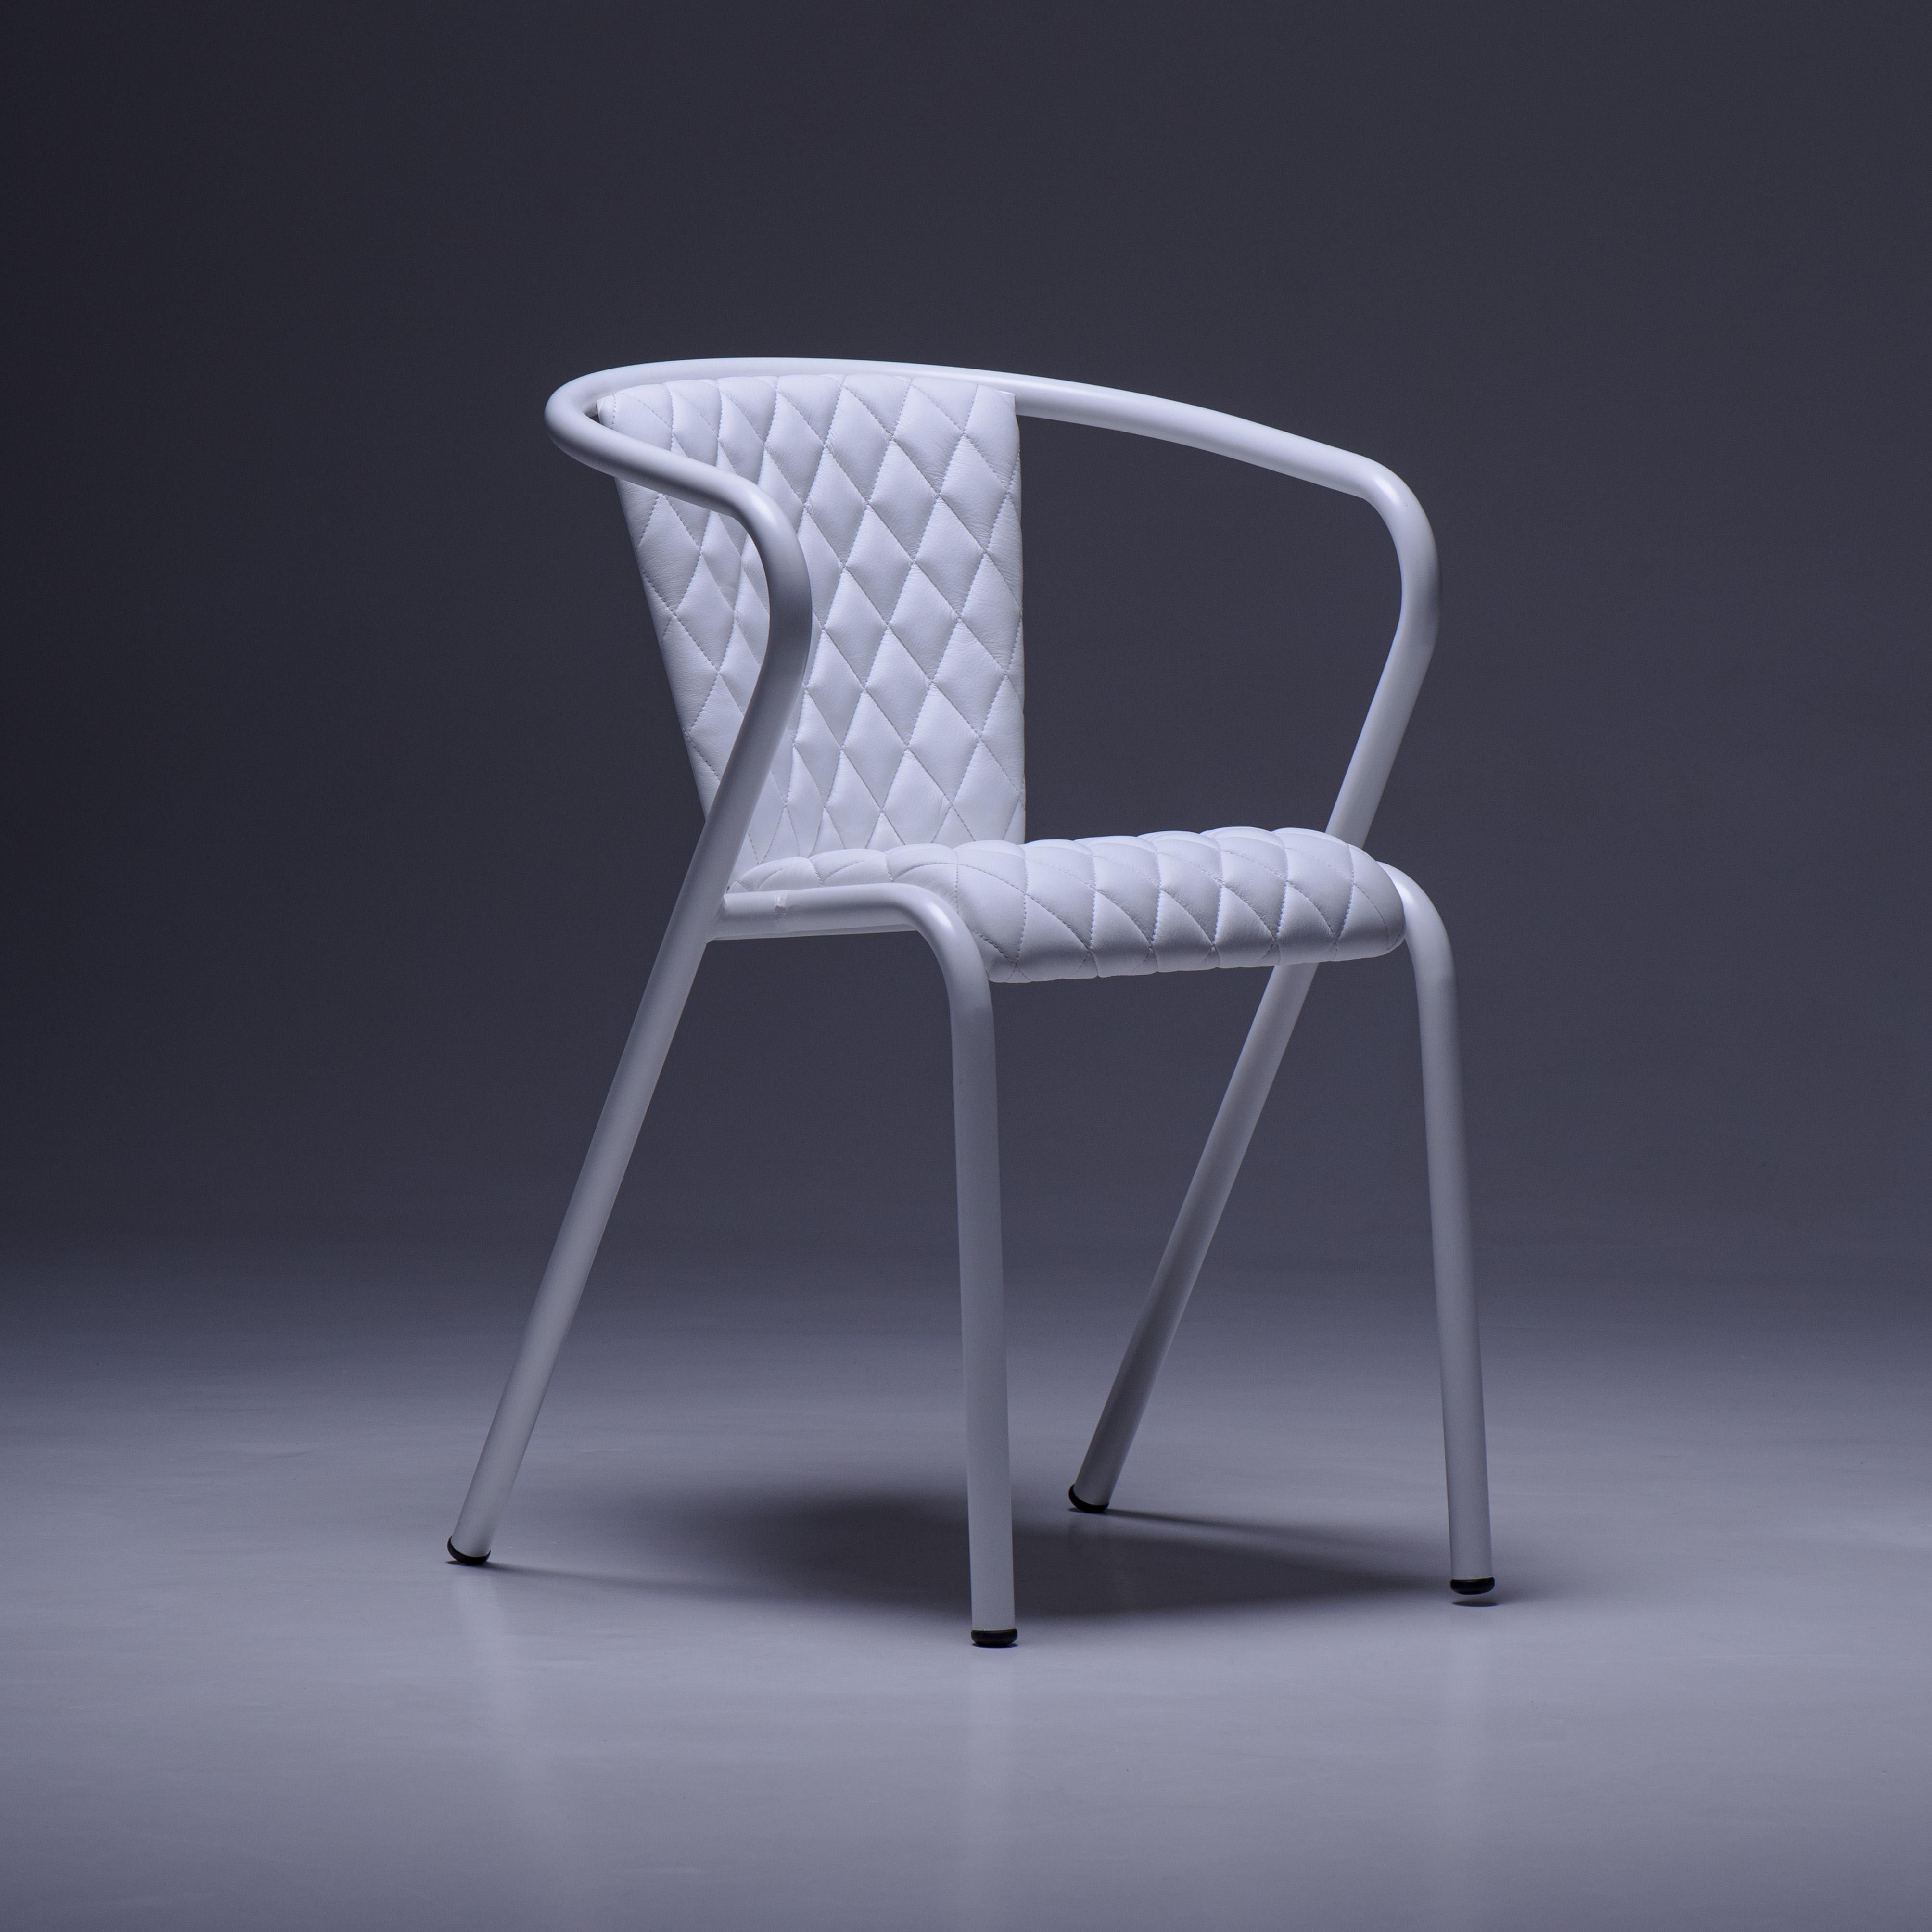 The BICAchair is a comfortable stackable steel dining armchair made from recycled and recyclable steel, finished with our premium selection of powder-coating colors, in this case in White, that transform a classic into something new and vibrant. The